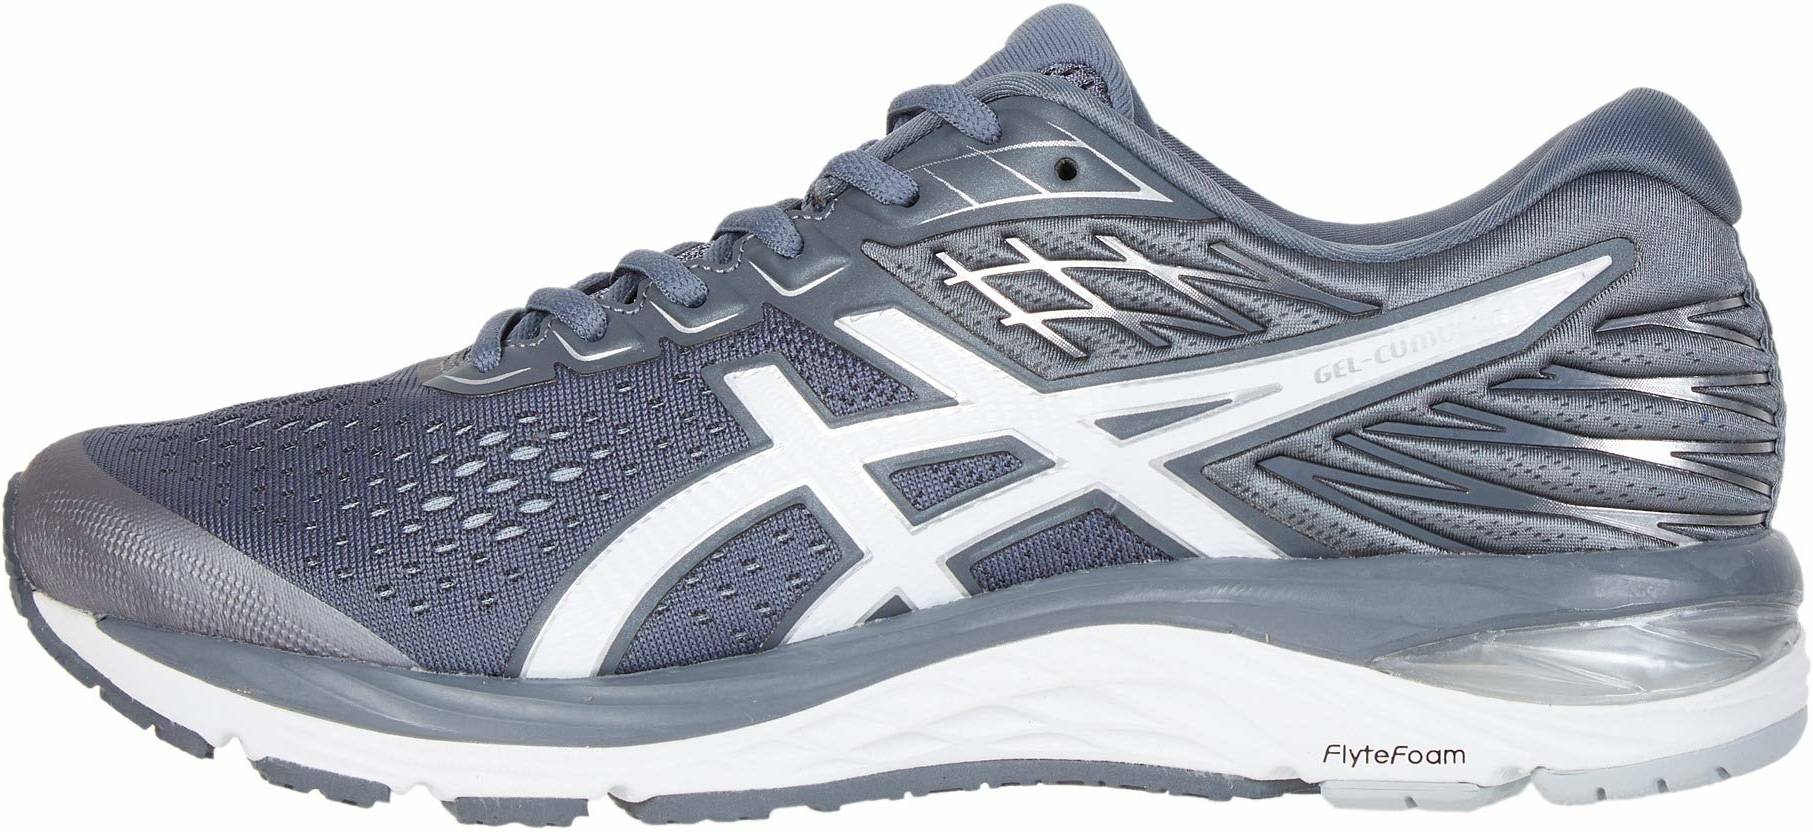 Save 23% on Wide Road Running Shoes 